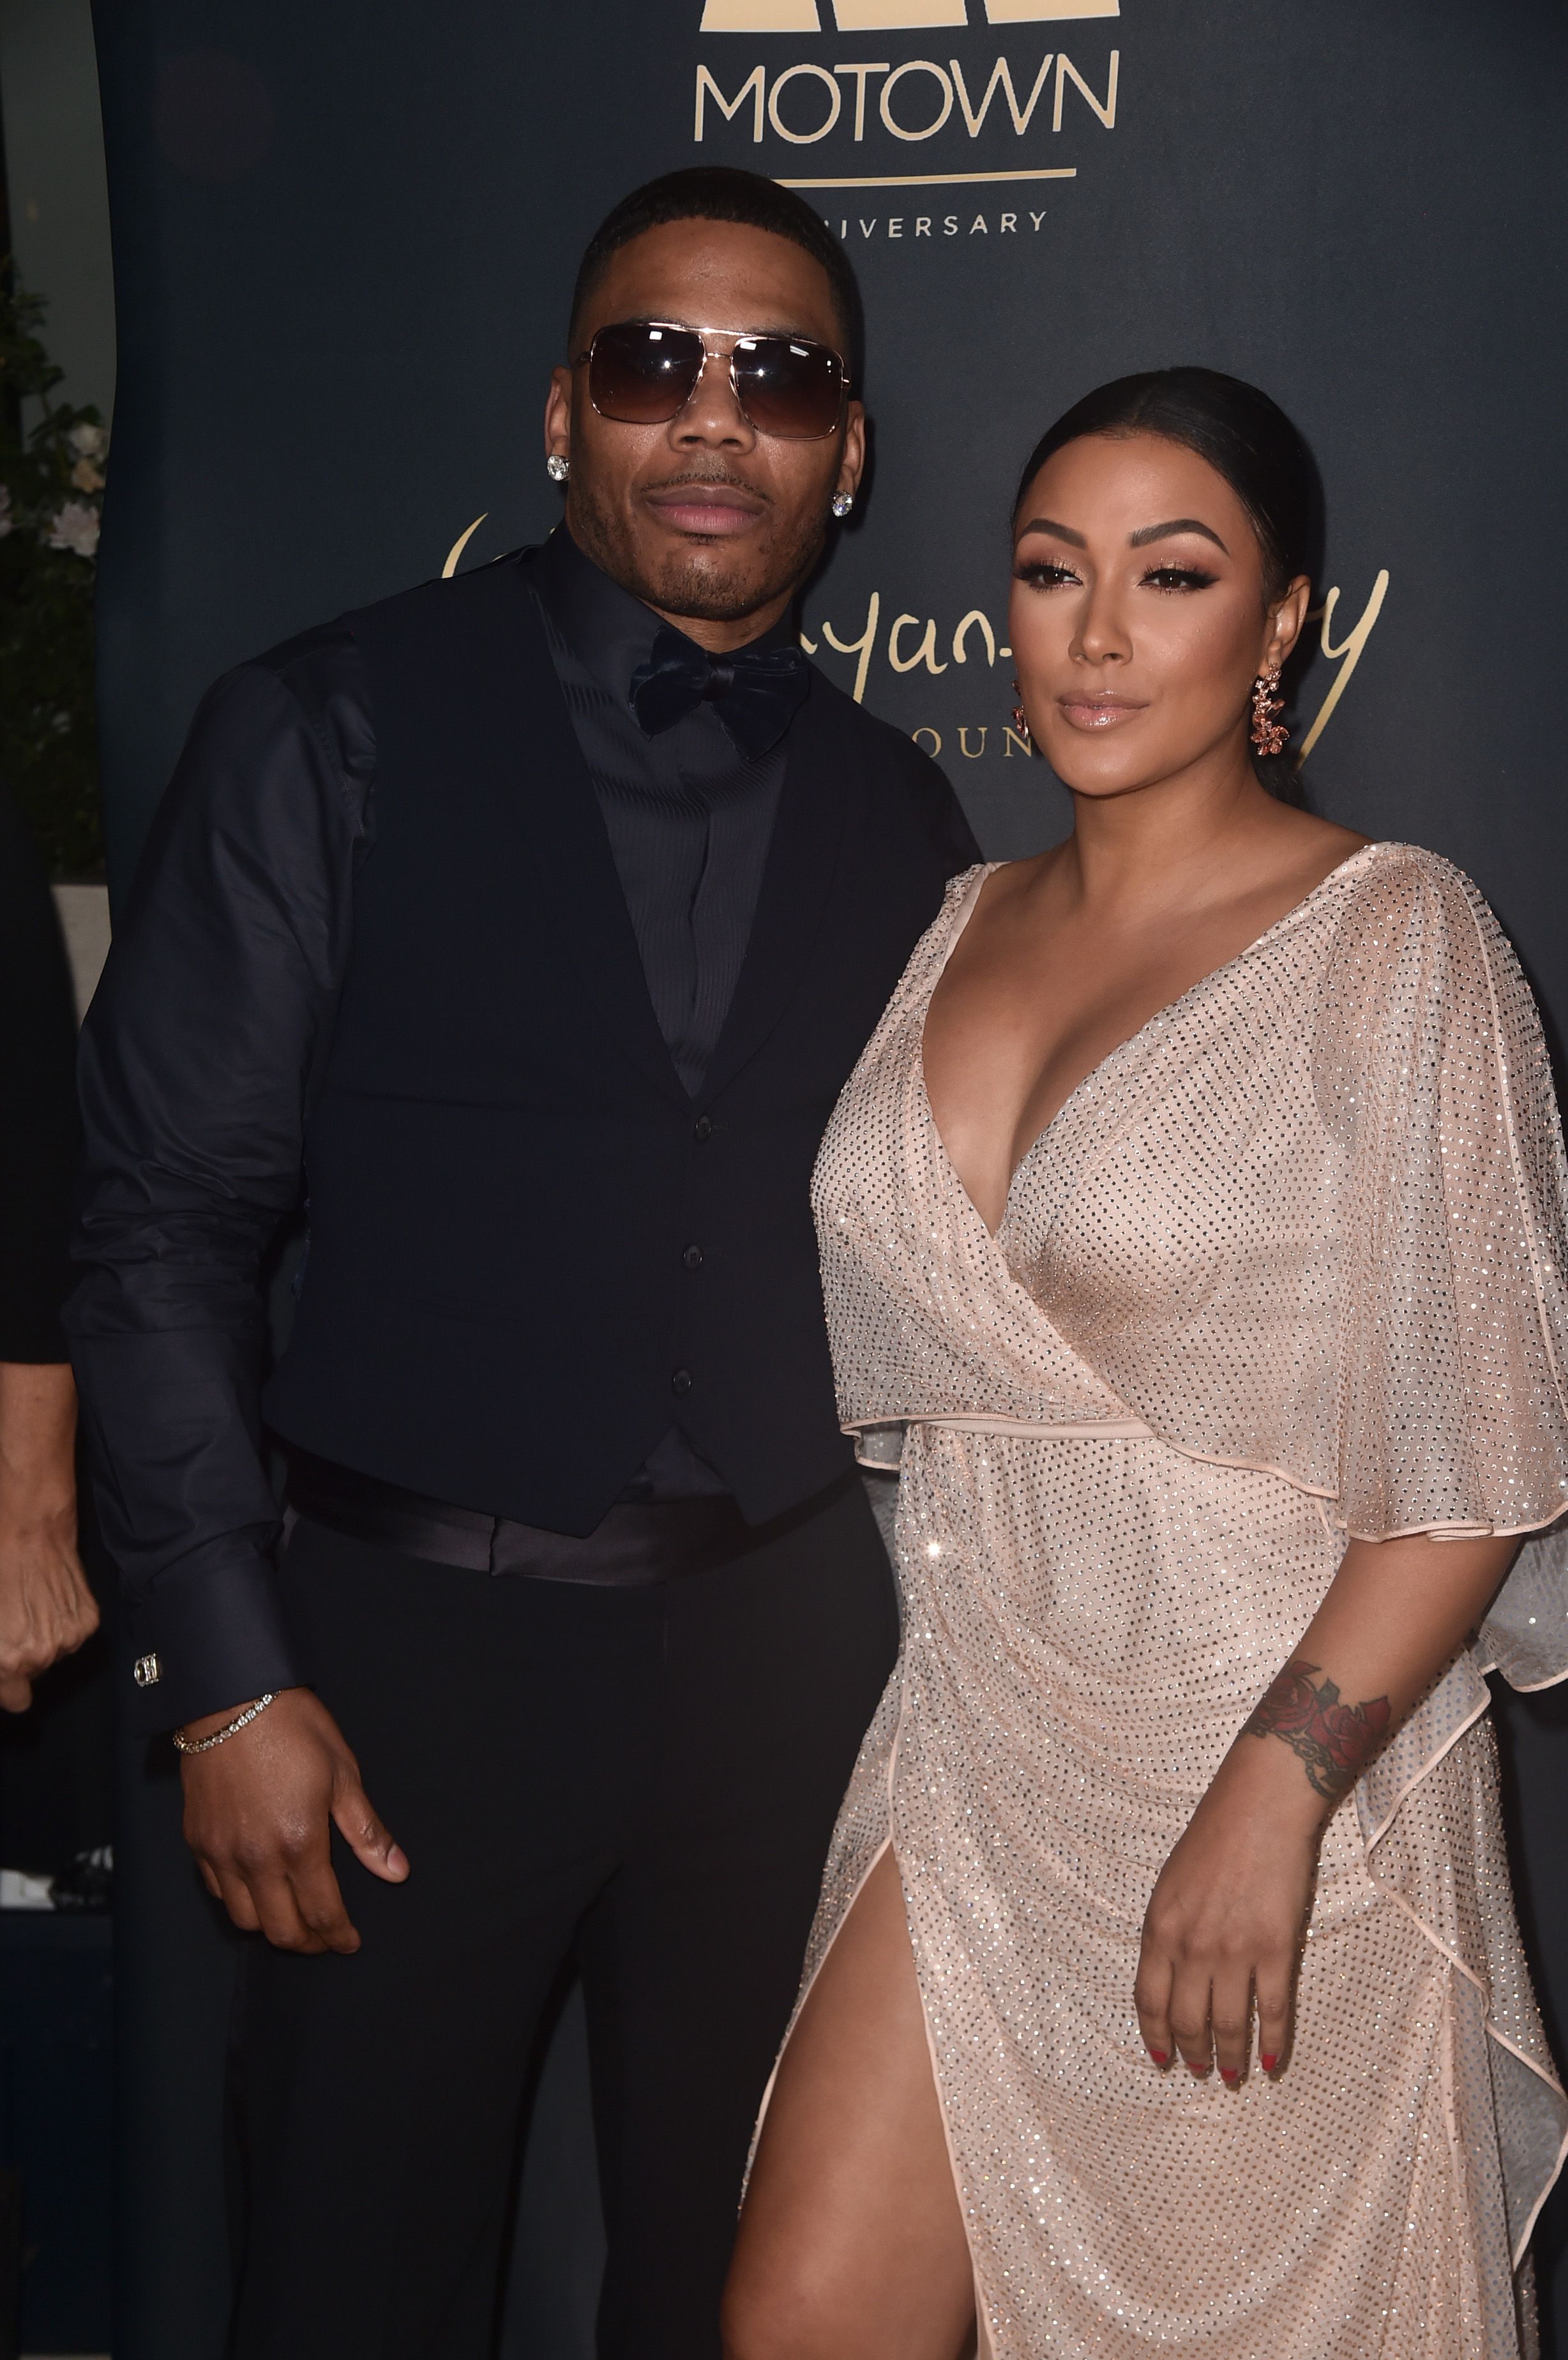 Nelly and Shantel Jackson at the Ryan Gordy Foundation's celebration of 60 Years Of Motown on November 11, 2019 | Photo: Getty Images